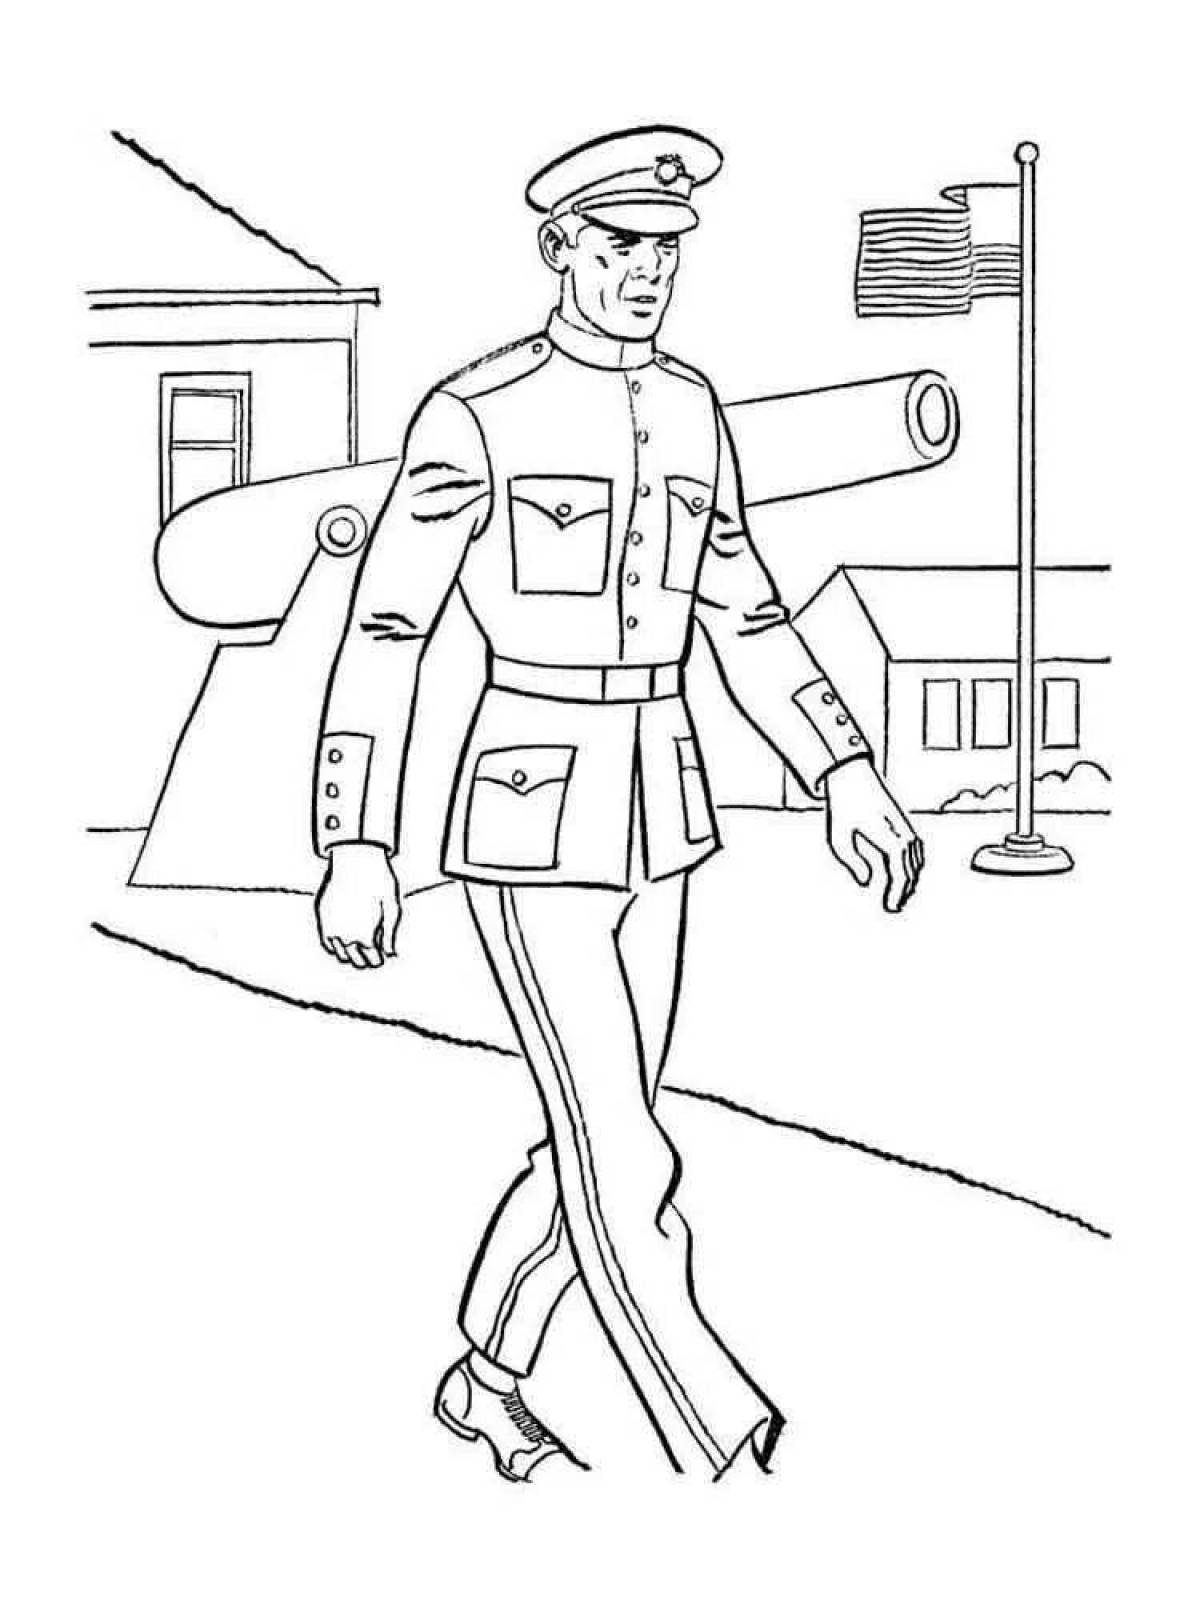 Humorous soldier coloring page 23 February